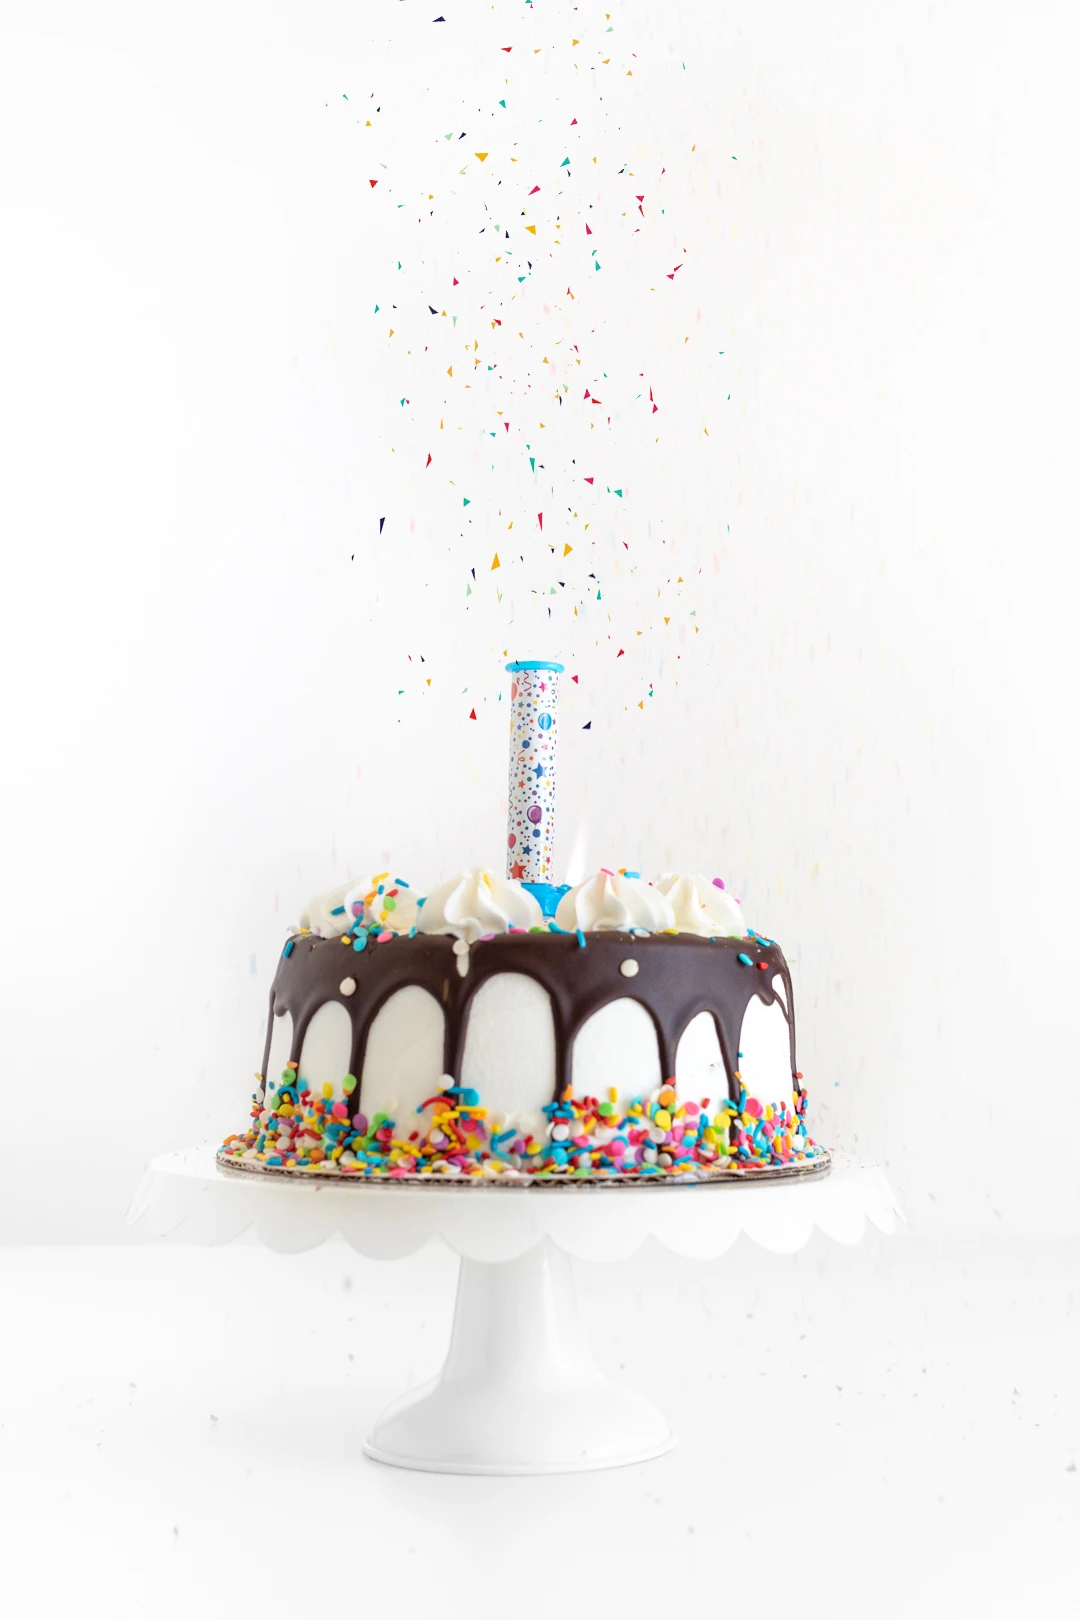 surprise candle loaded with edible confetti placed onto a simple birthday cake with a chocolate drip